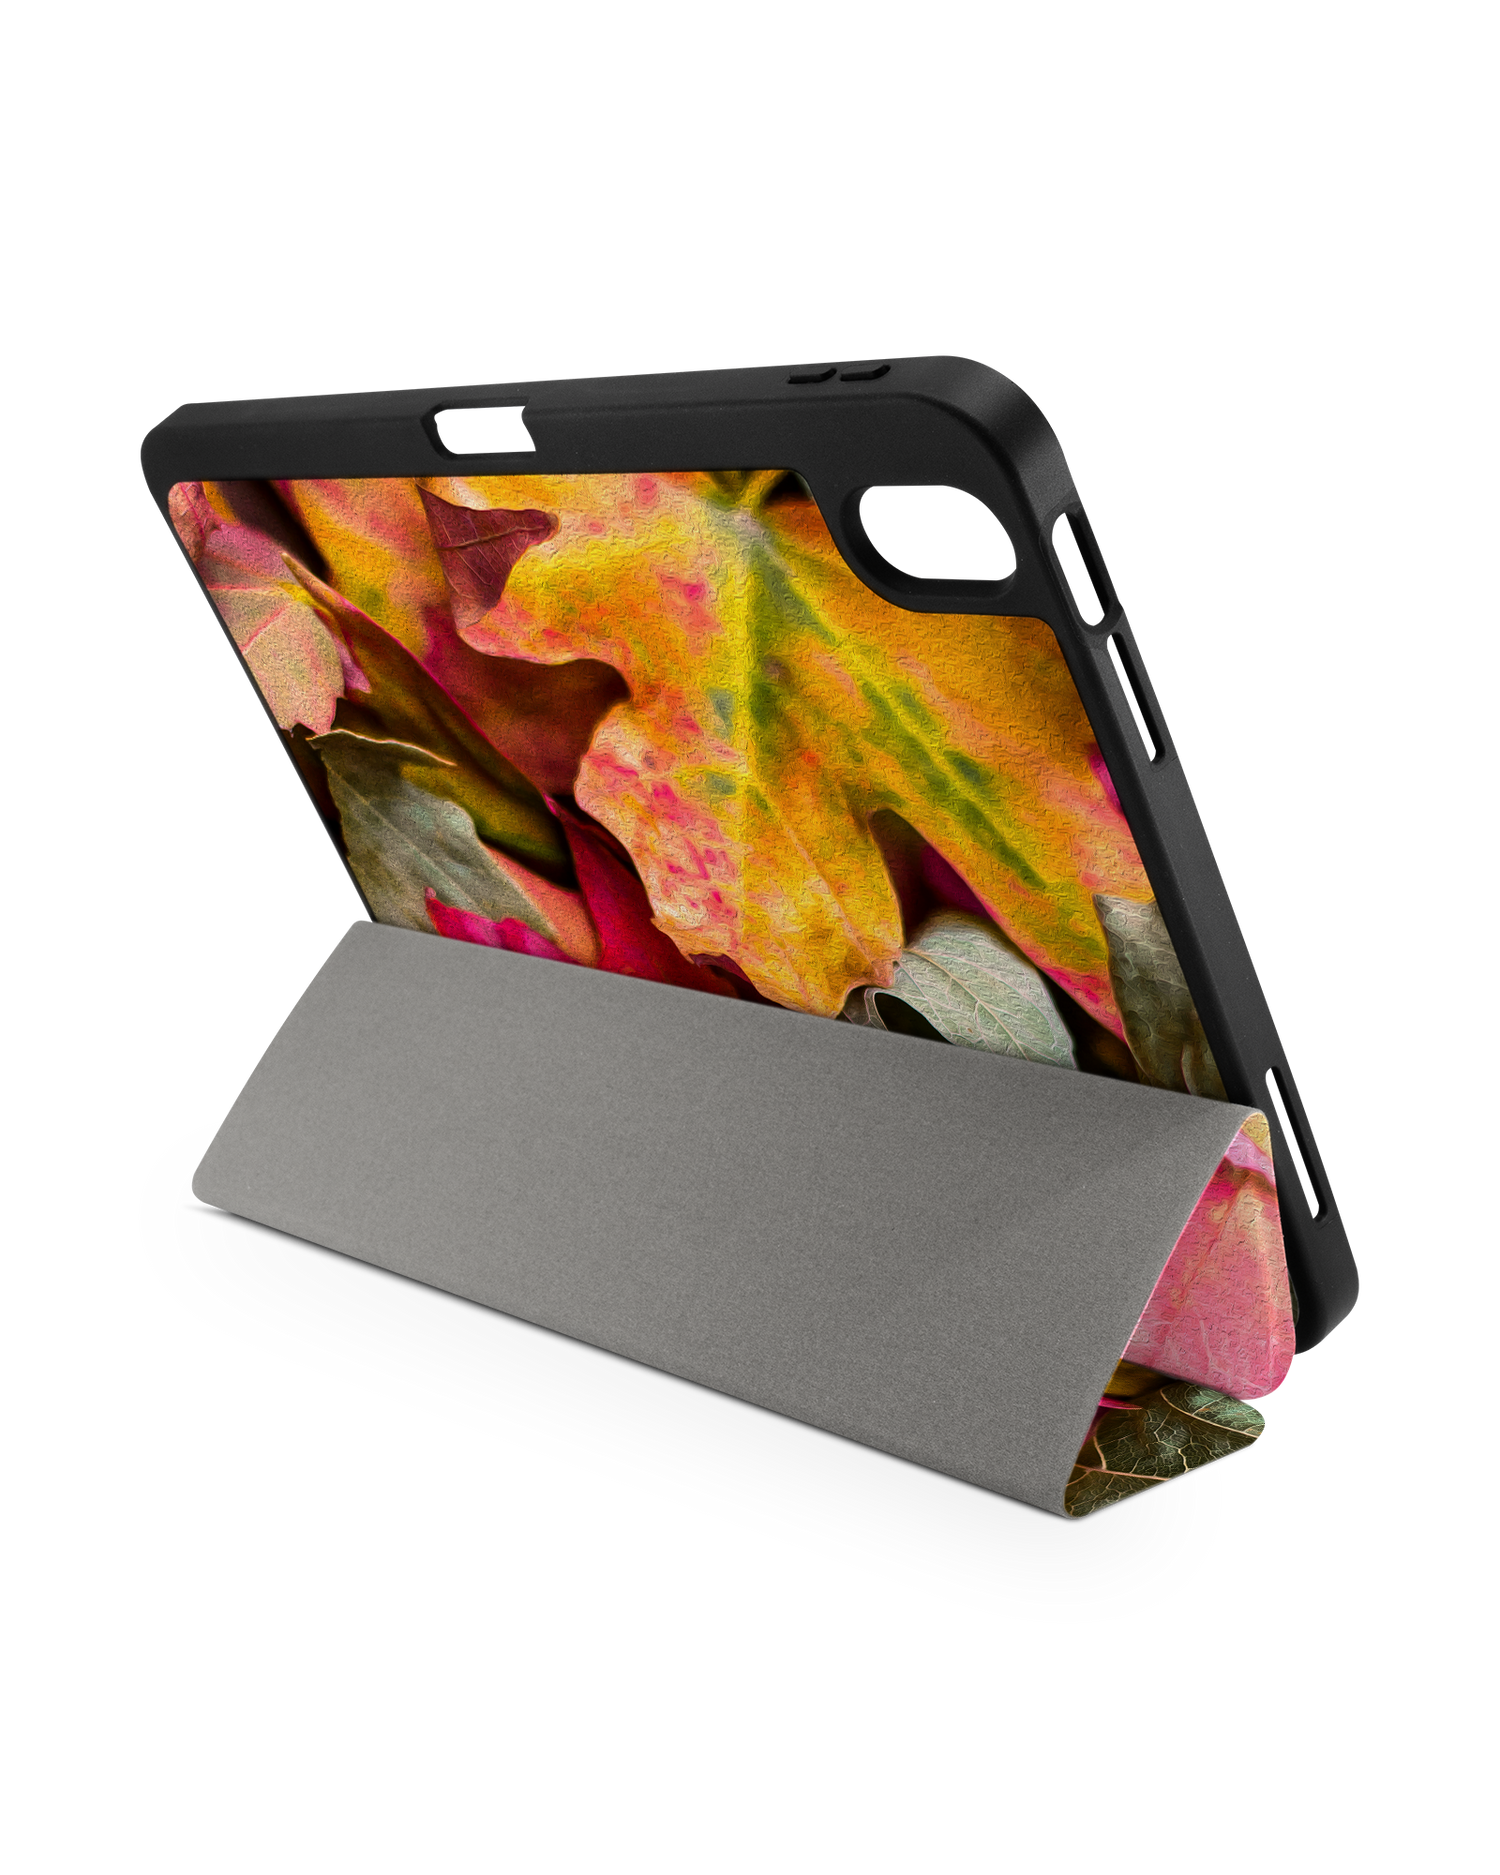 Autumn Leaves iPad Case with Pencil Holder for Apple iPad (10th Generation): Set up in landscape format (back view)